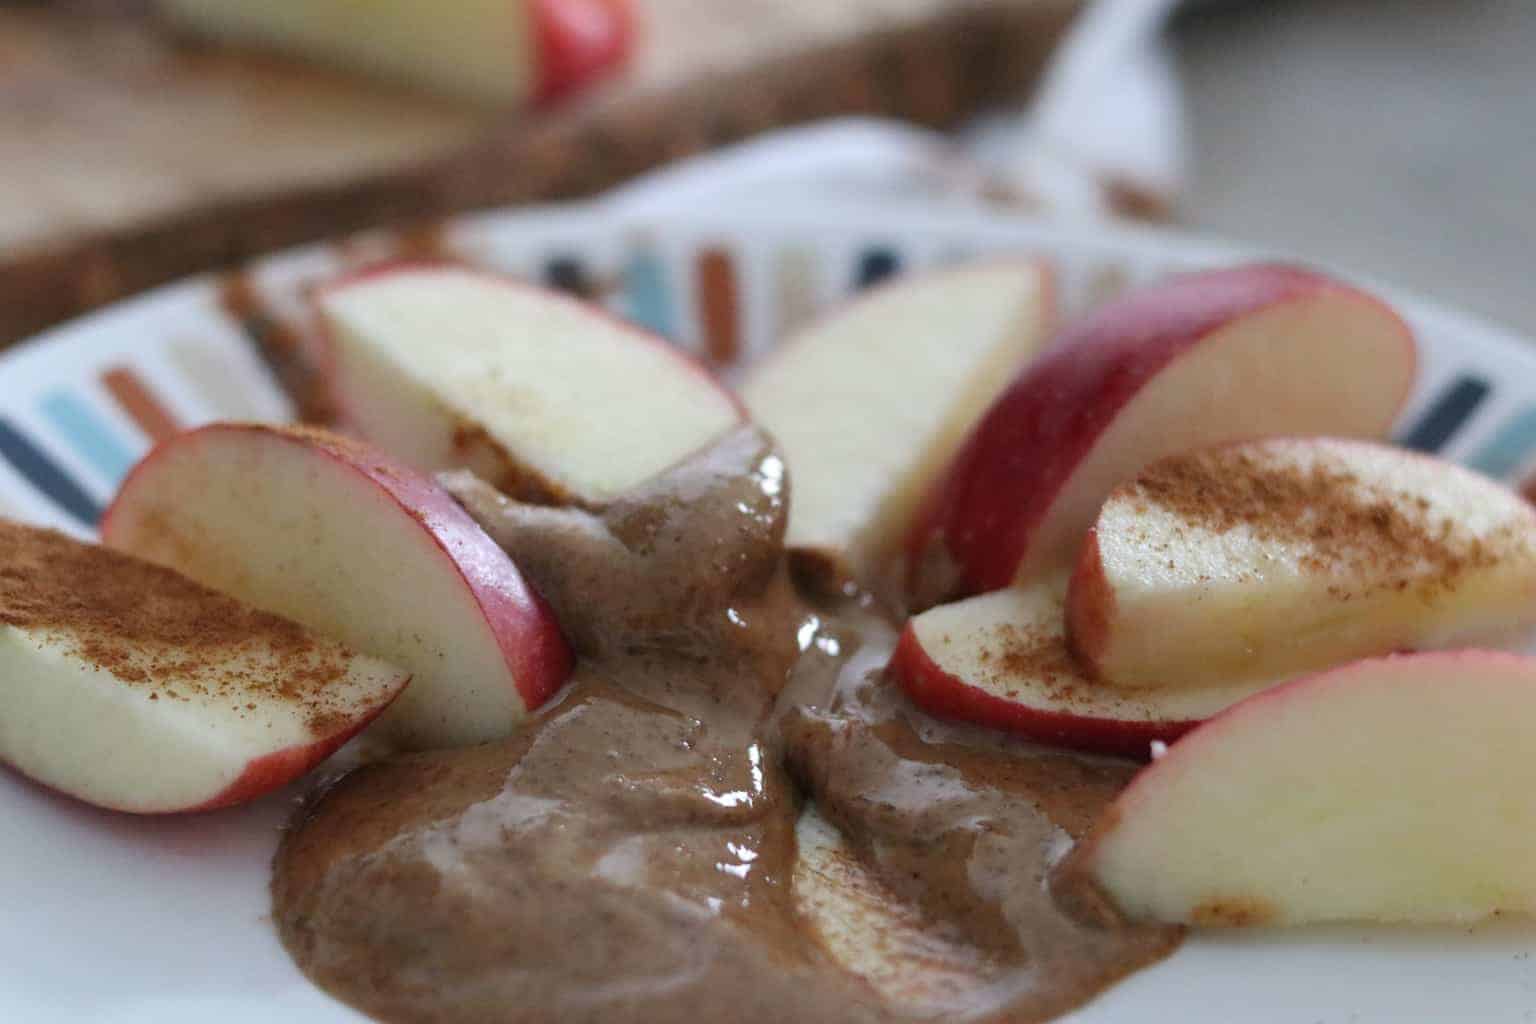 Apples slices and almond butter dip on plate.